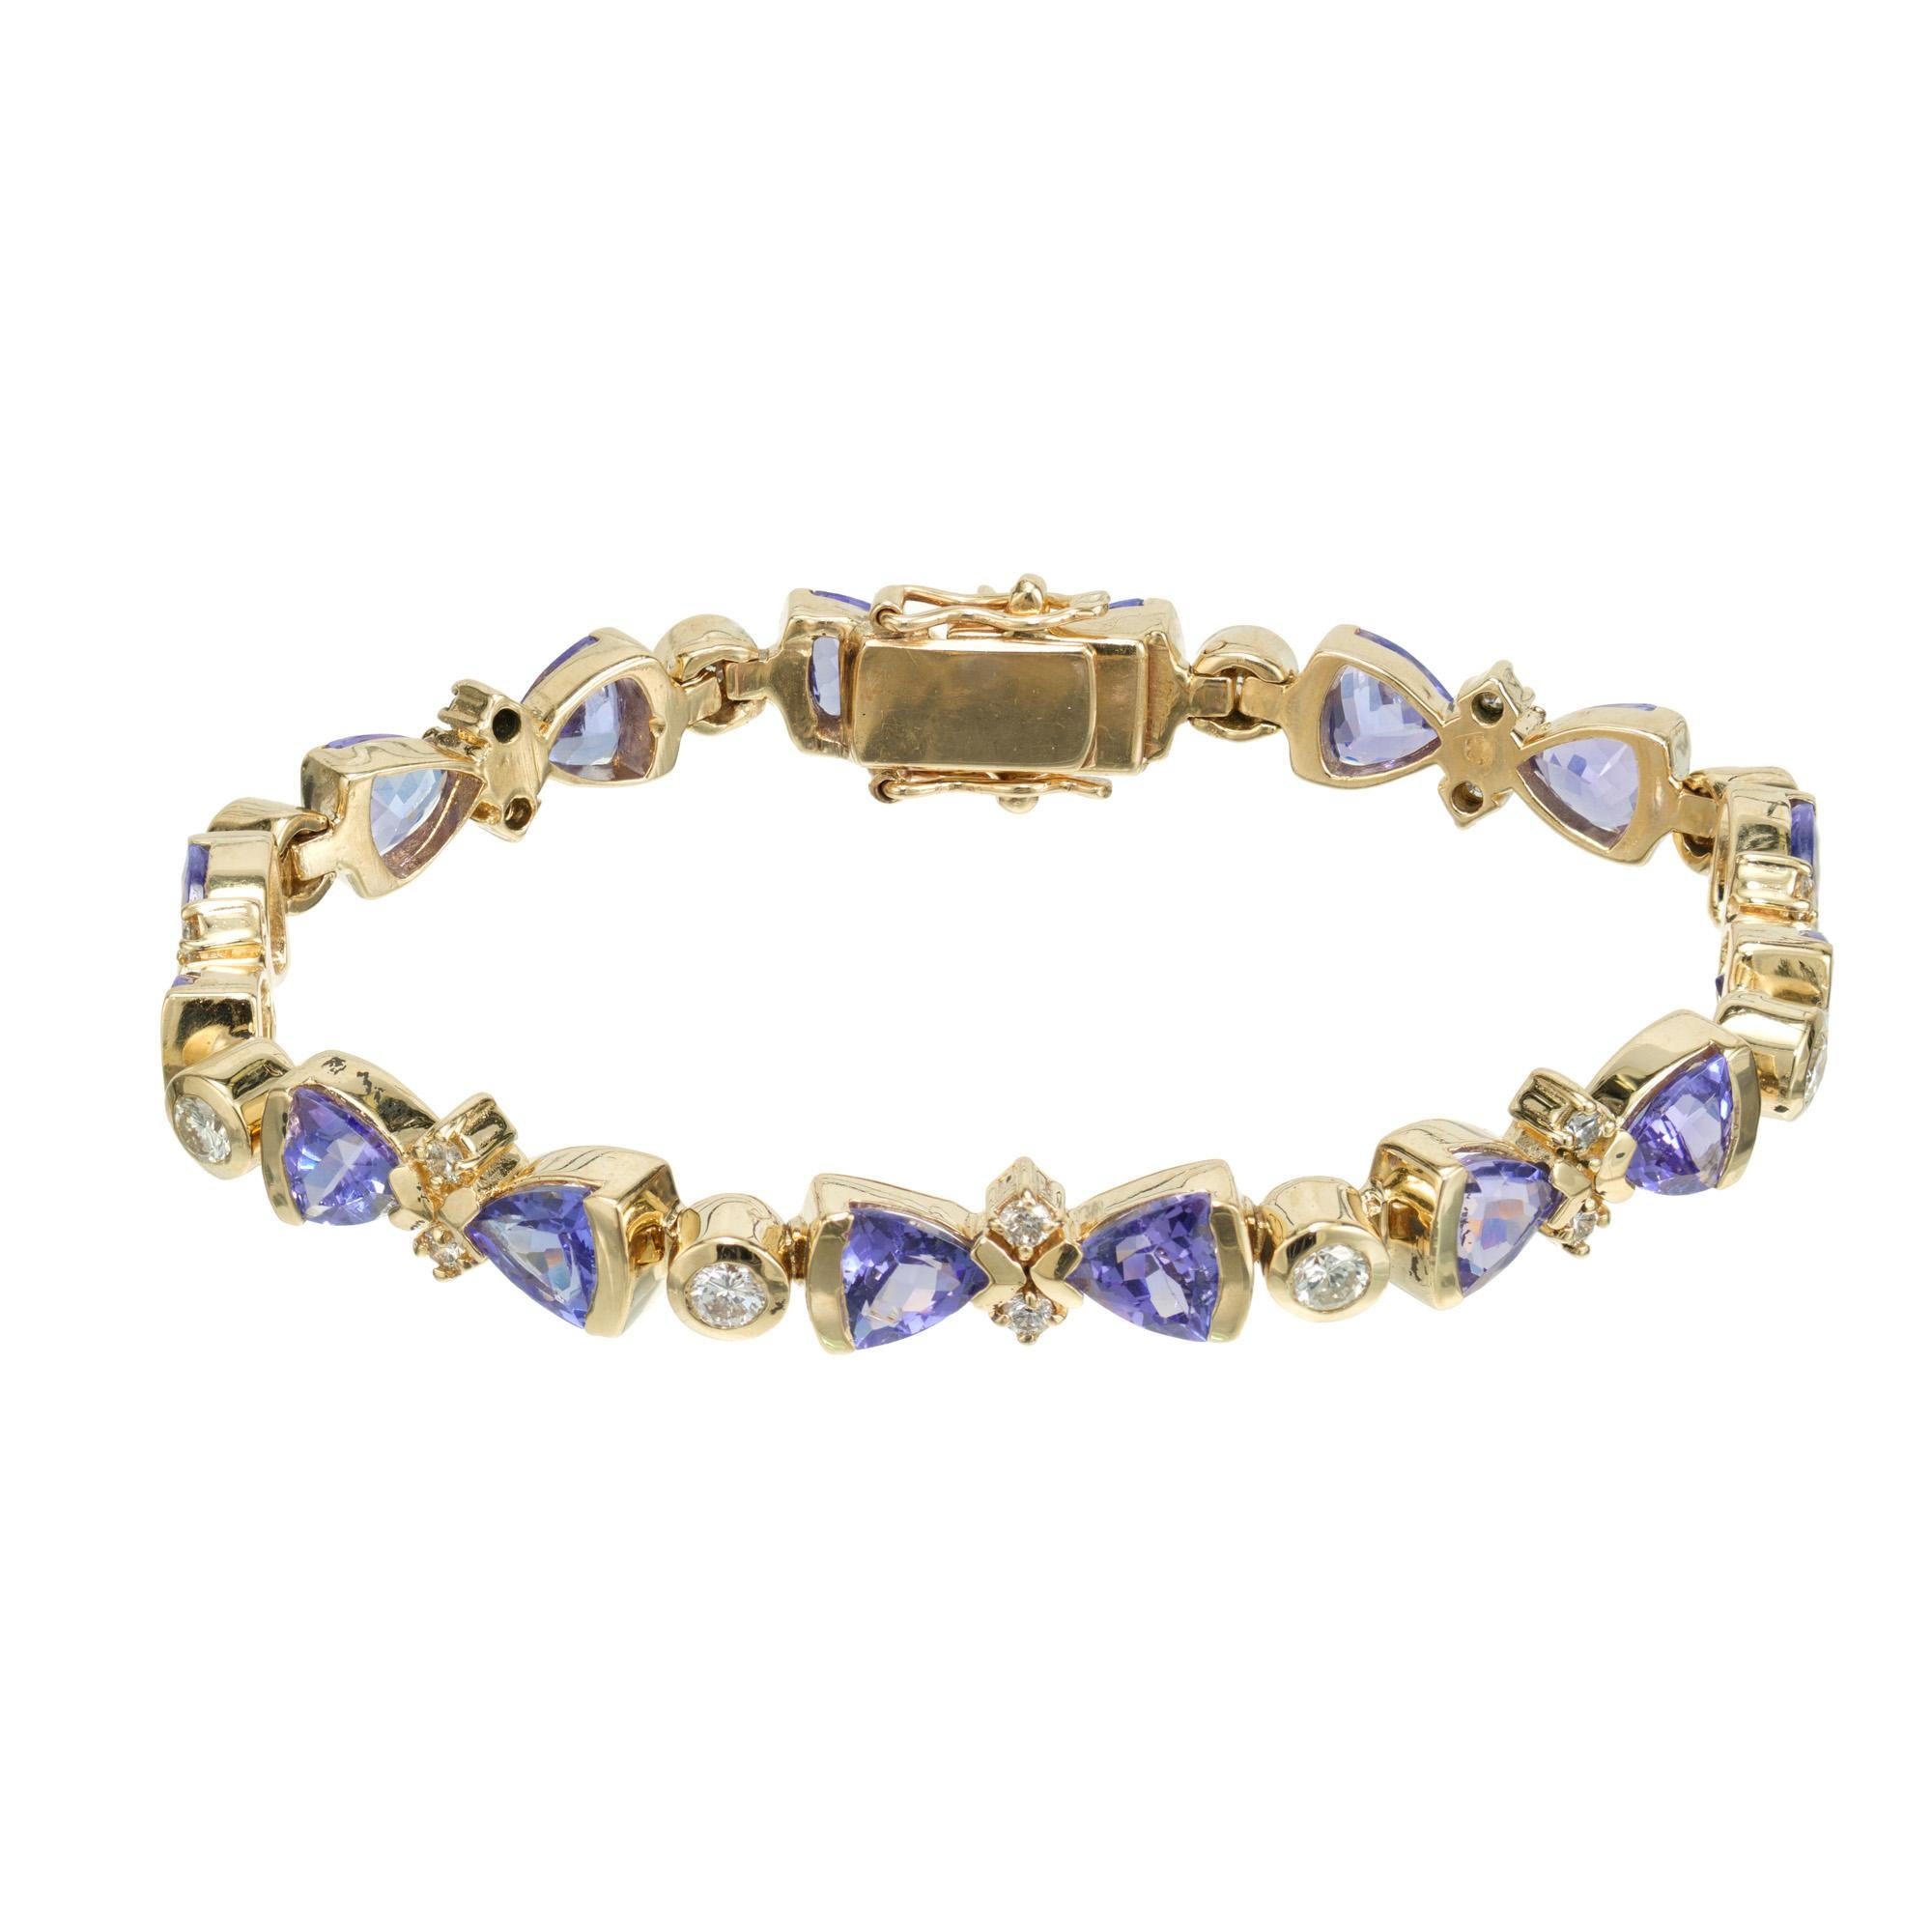 1970's Tanzanite and diamond link bracelet. 16 triangular purple blue semi bezel set tanzanite's totaling 5.60cts. separated by 24 round bezel set diamonds totaling 1.00cts in 14k yellow gold. The bracelet measures 7 inches and is secured with a